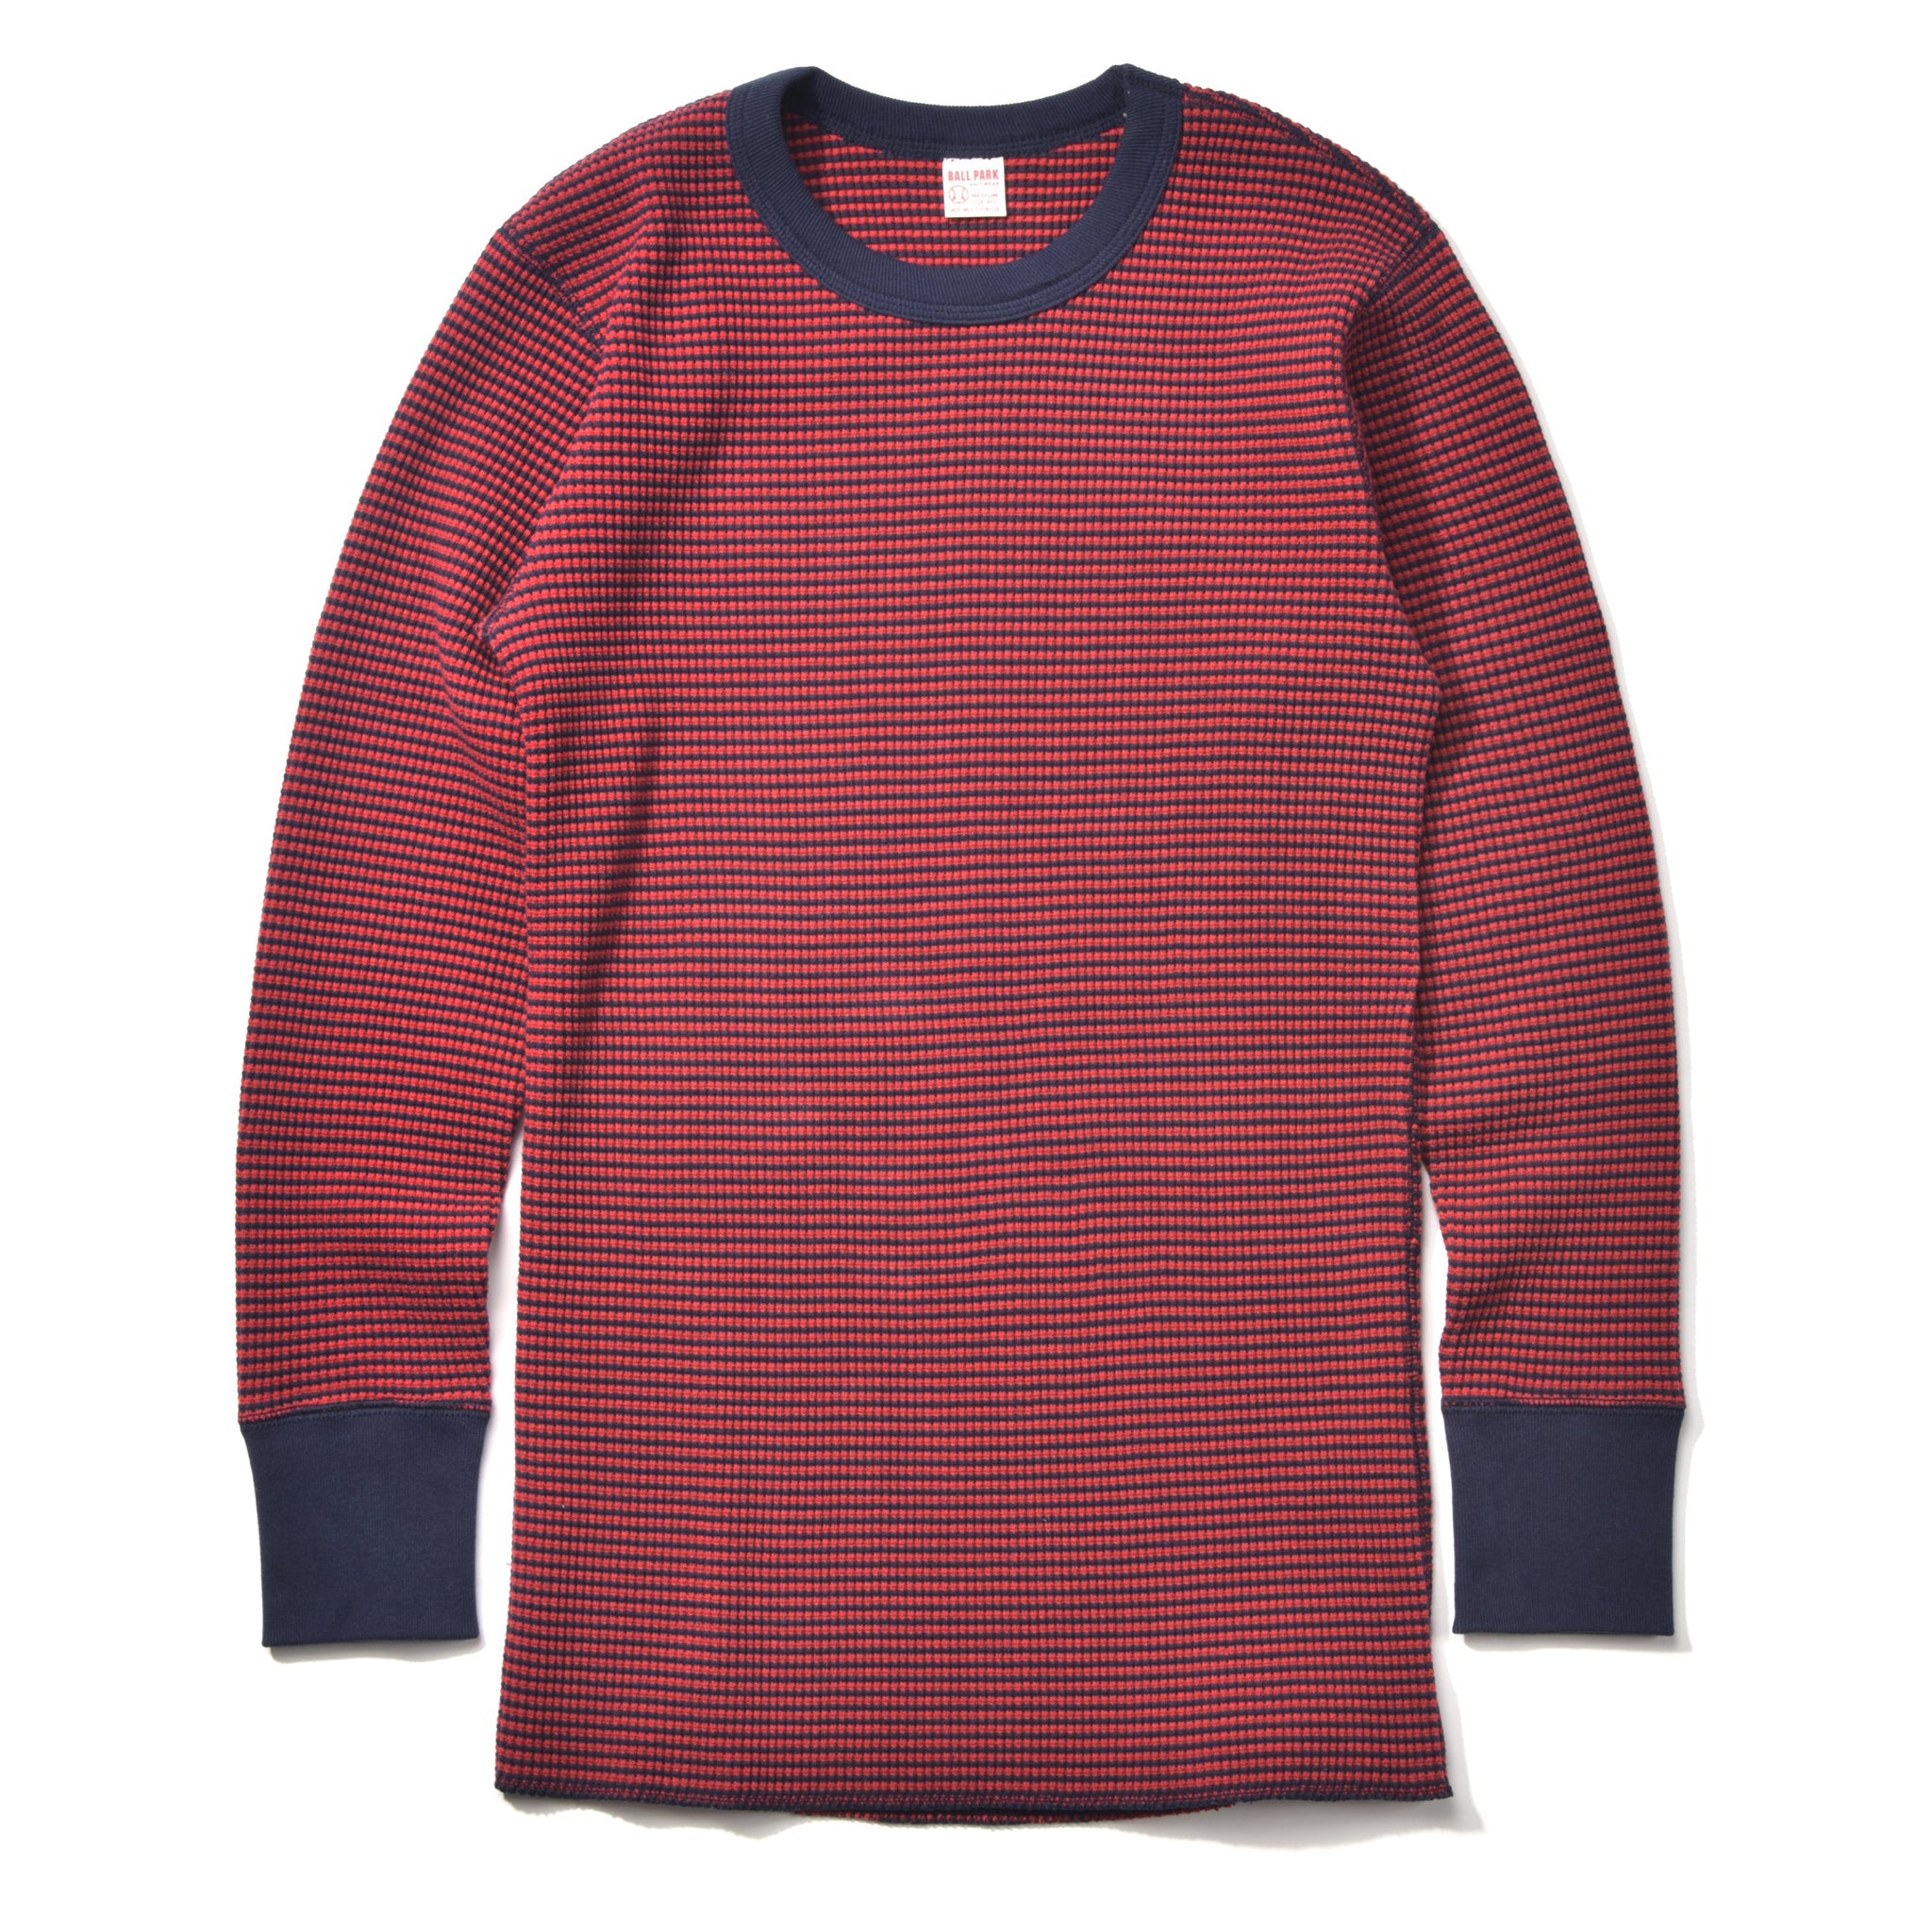 WAFFLE STRIPE THERMAL SHIRT L/S – The Real McCoy's